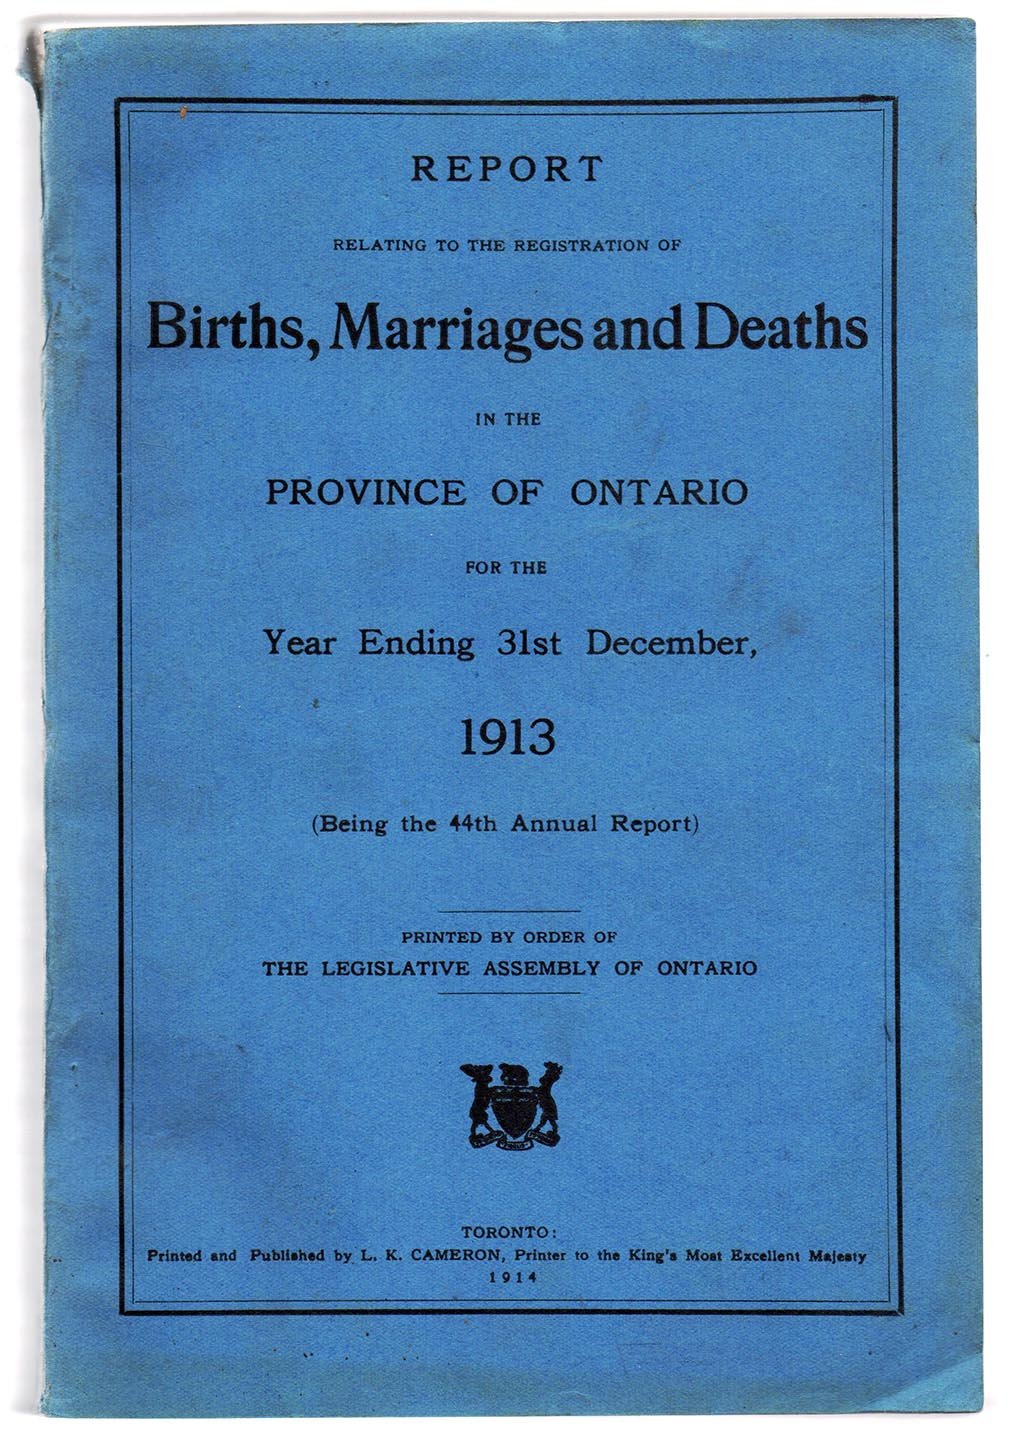 Report Relating to the Registration of Births, Marriages and Deaths in the Province of Ontario for the Year Ending 31st December, 1913 (Being the 44th Annual Report)